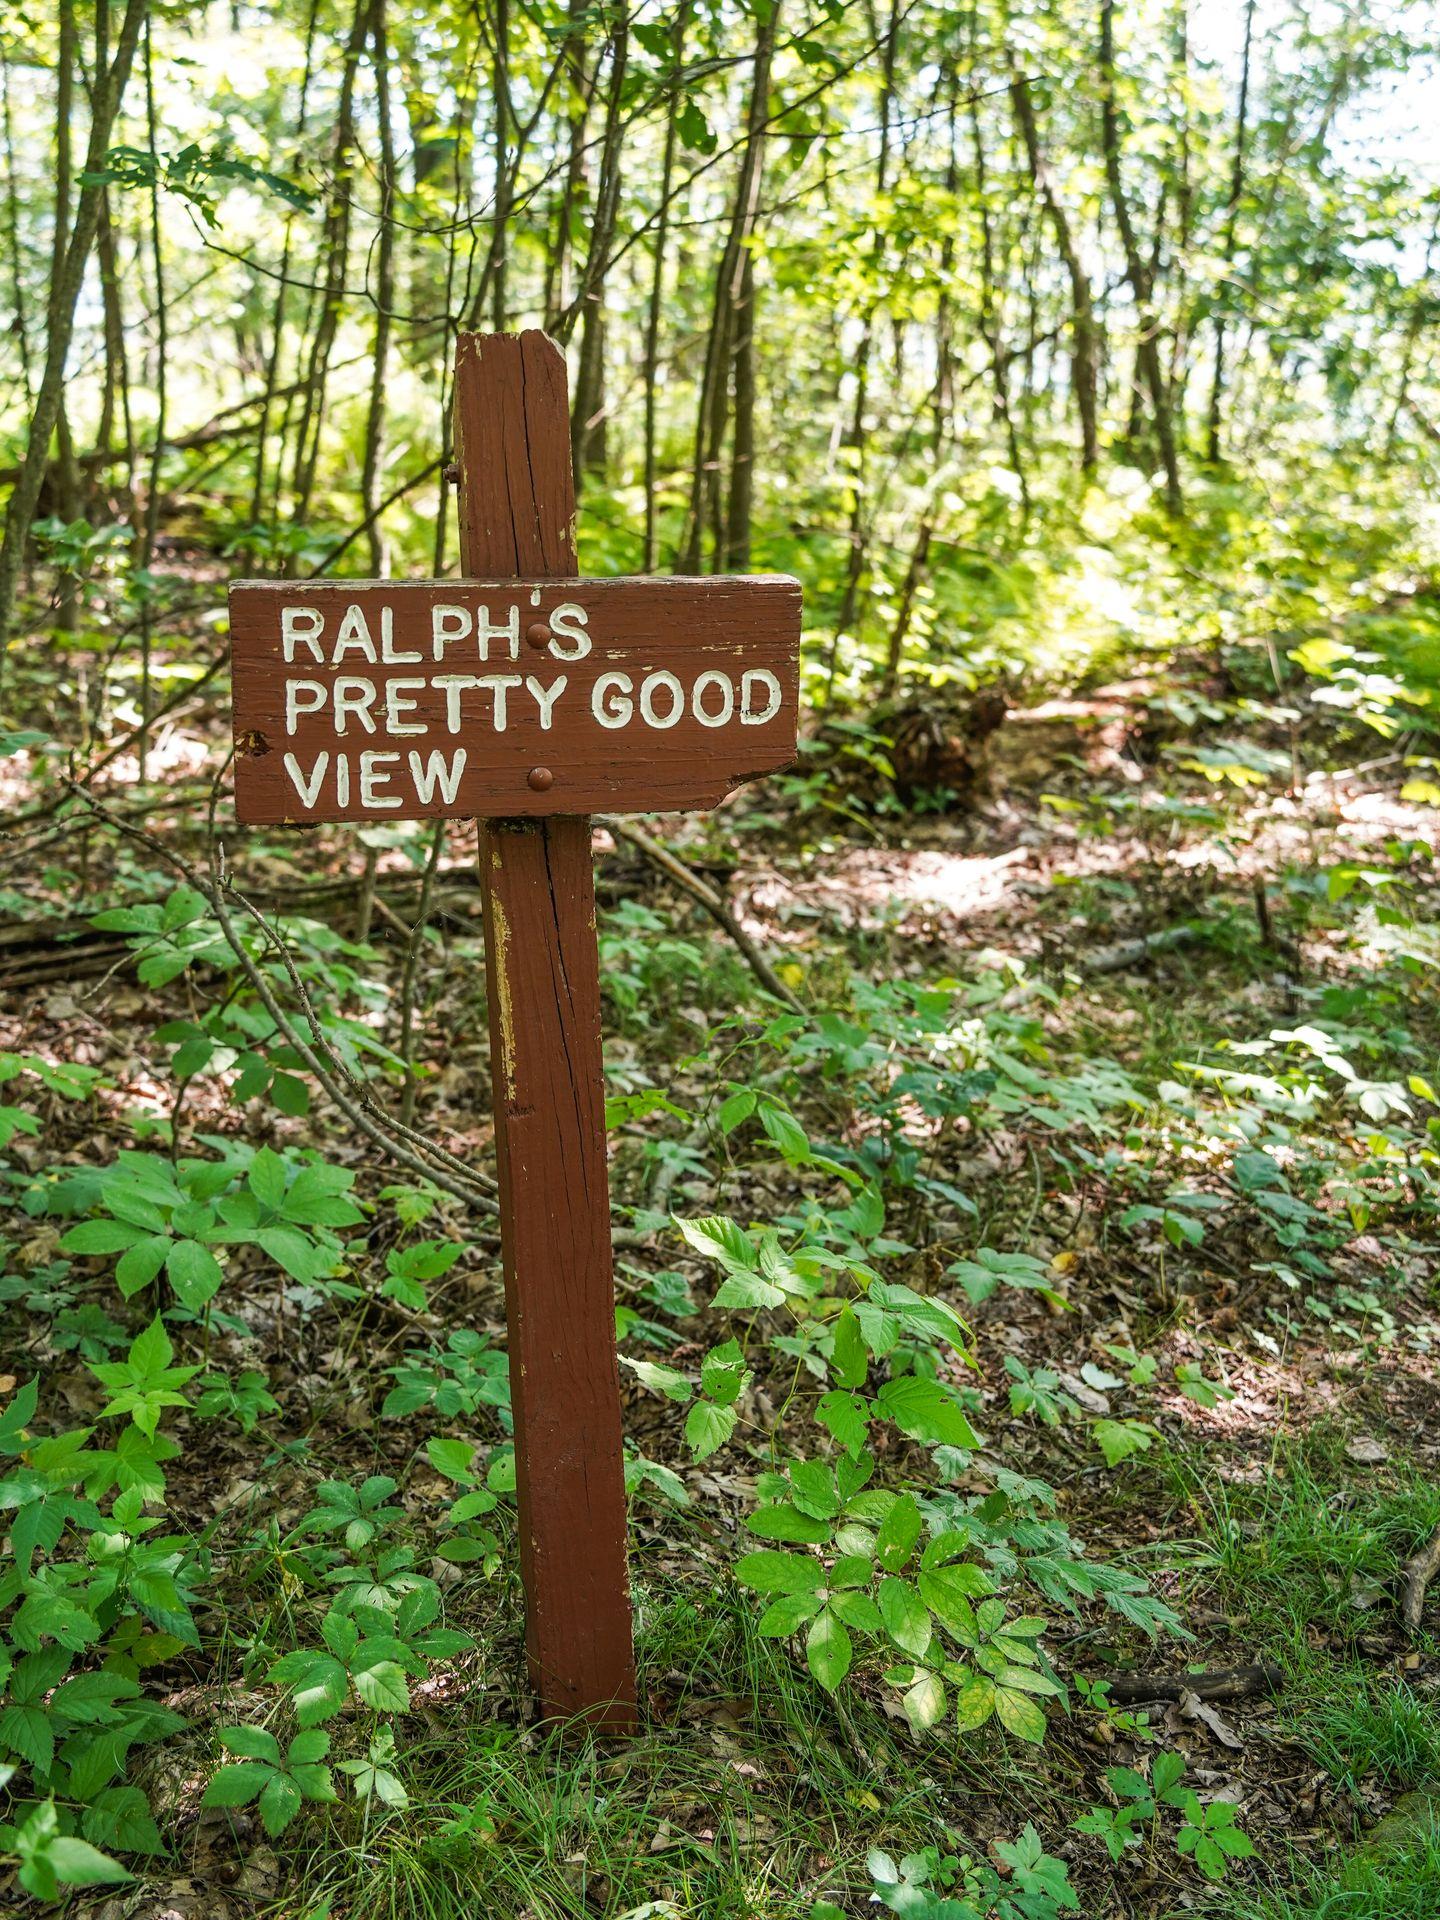 A wooden sign that reads "Ralph's Pretty Good View"